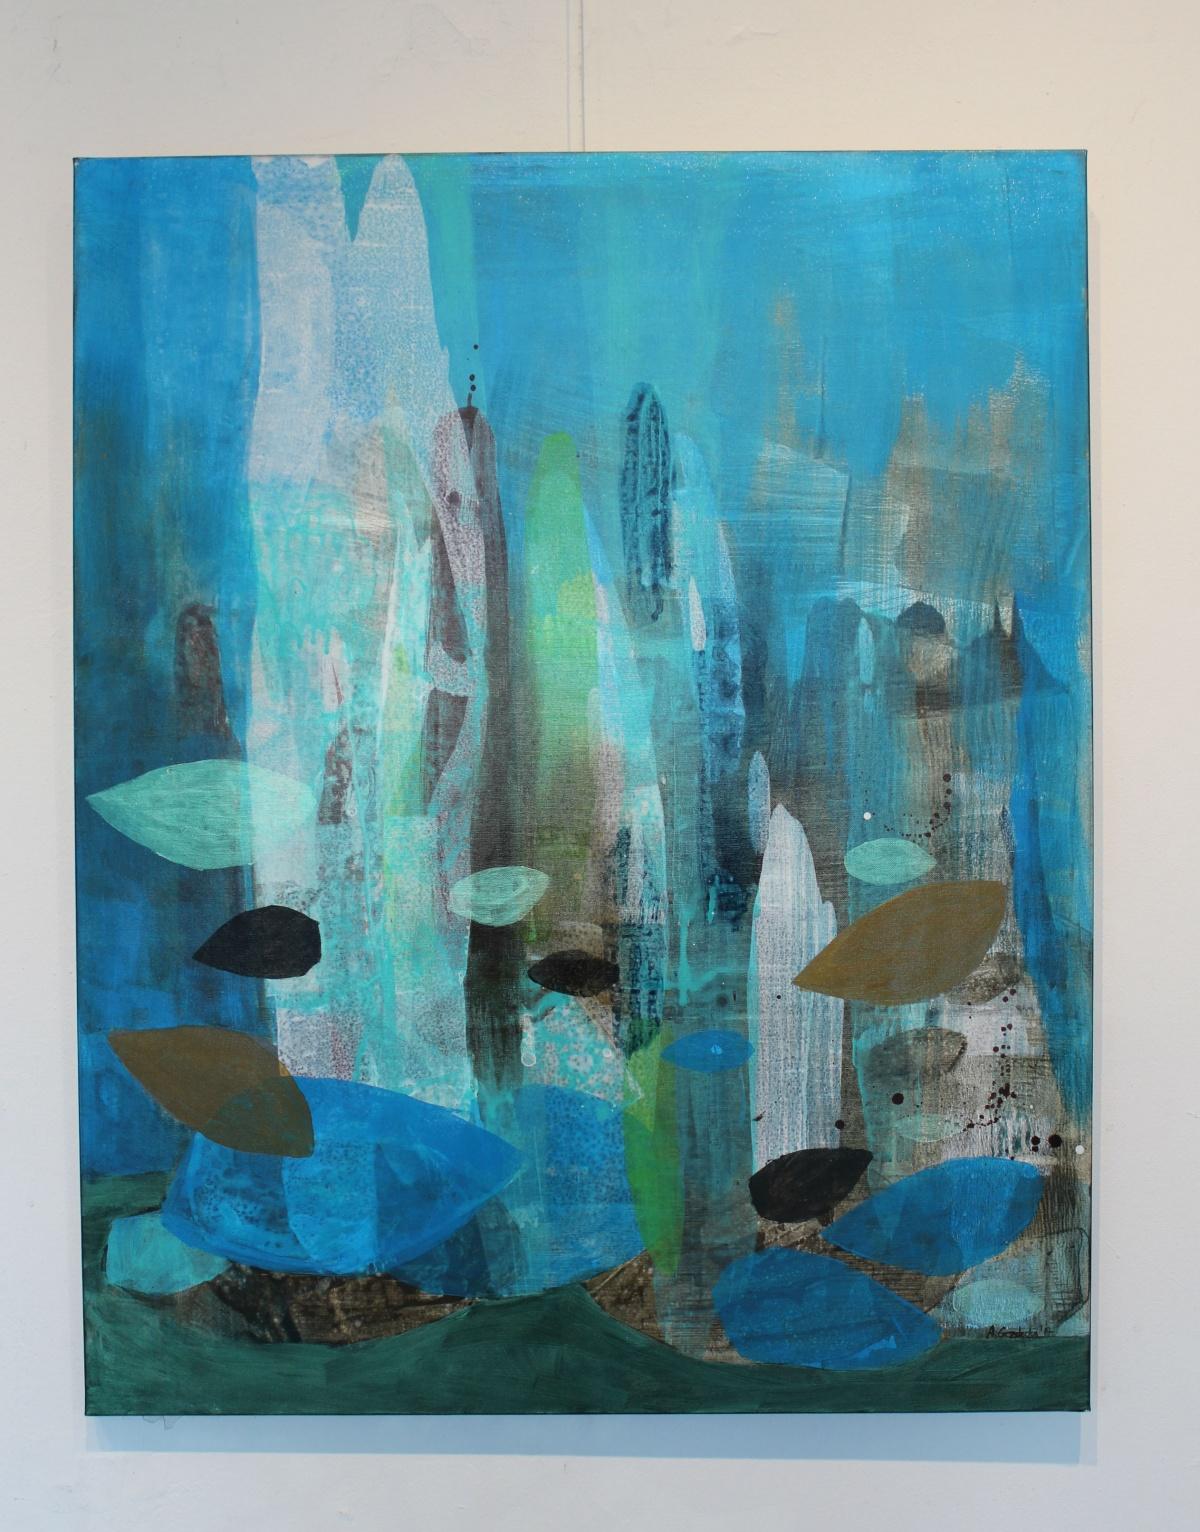 The city of grass- XXI century, Acrylic painting, Abstraction, Bright & colorful - Painting by Anna Masiul-Gozdecka